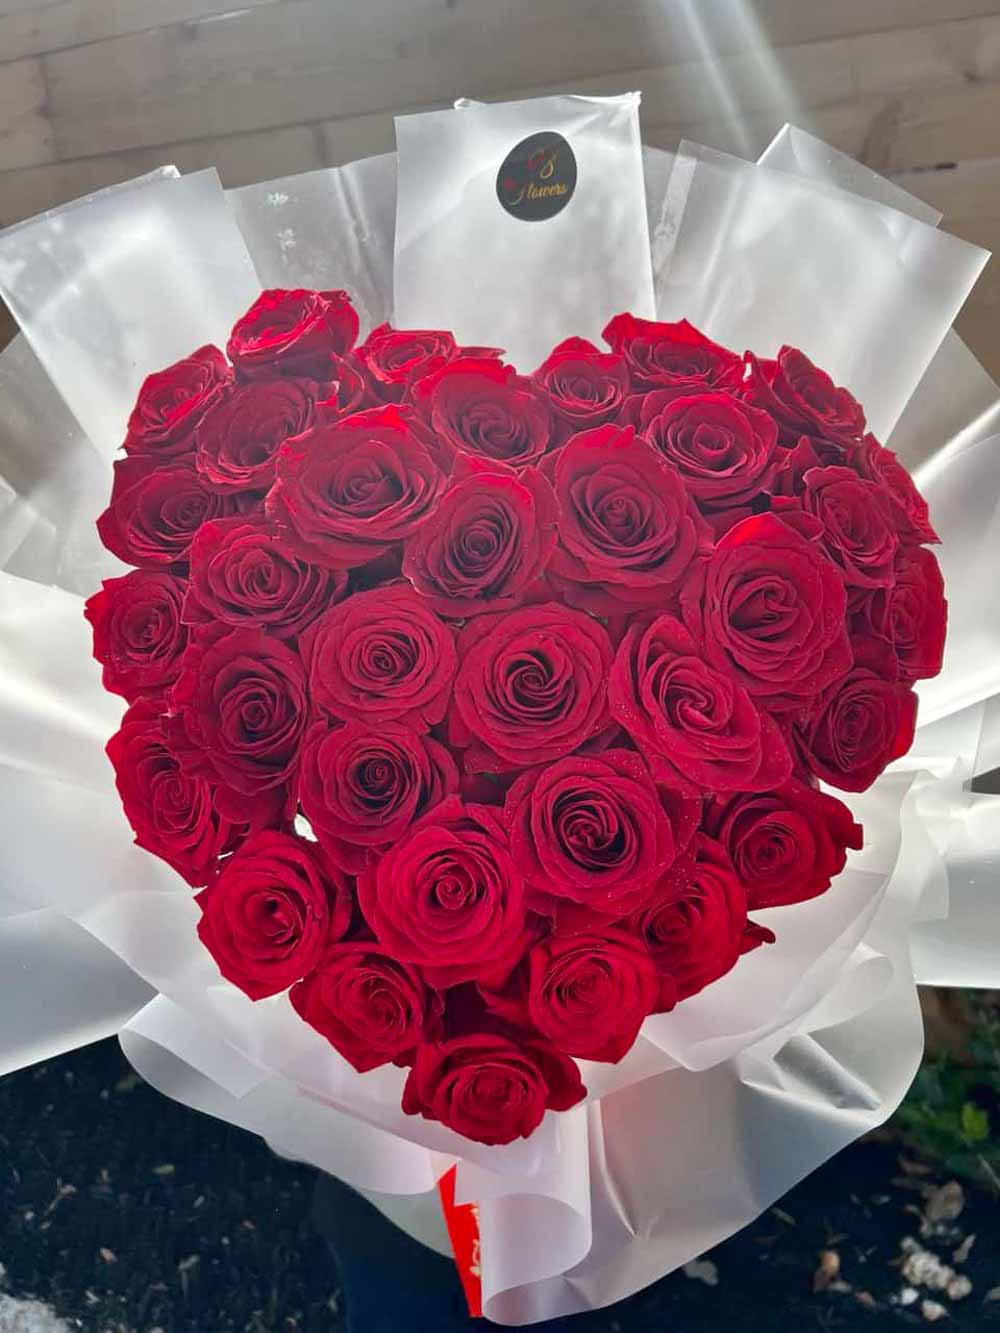 HEART BEAT is a special anniversary flowers gift